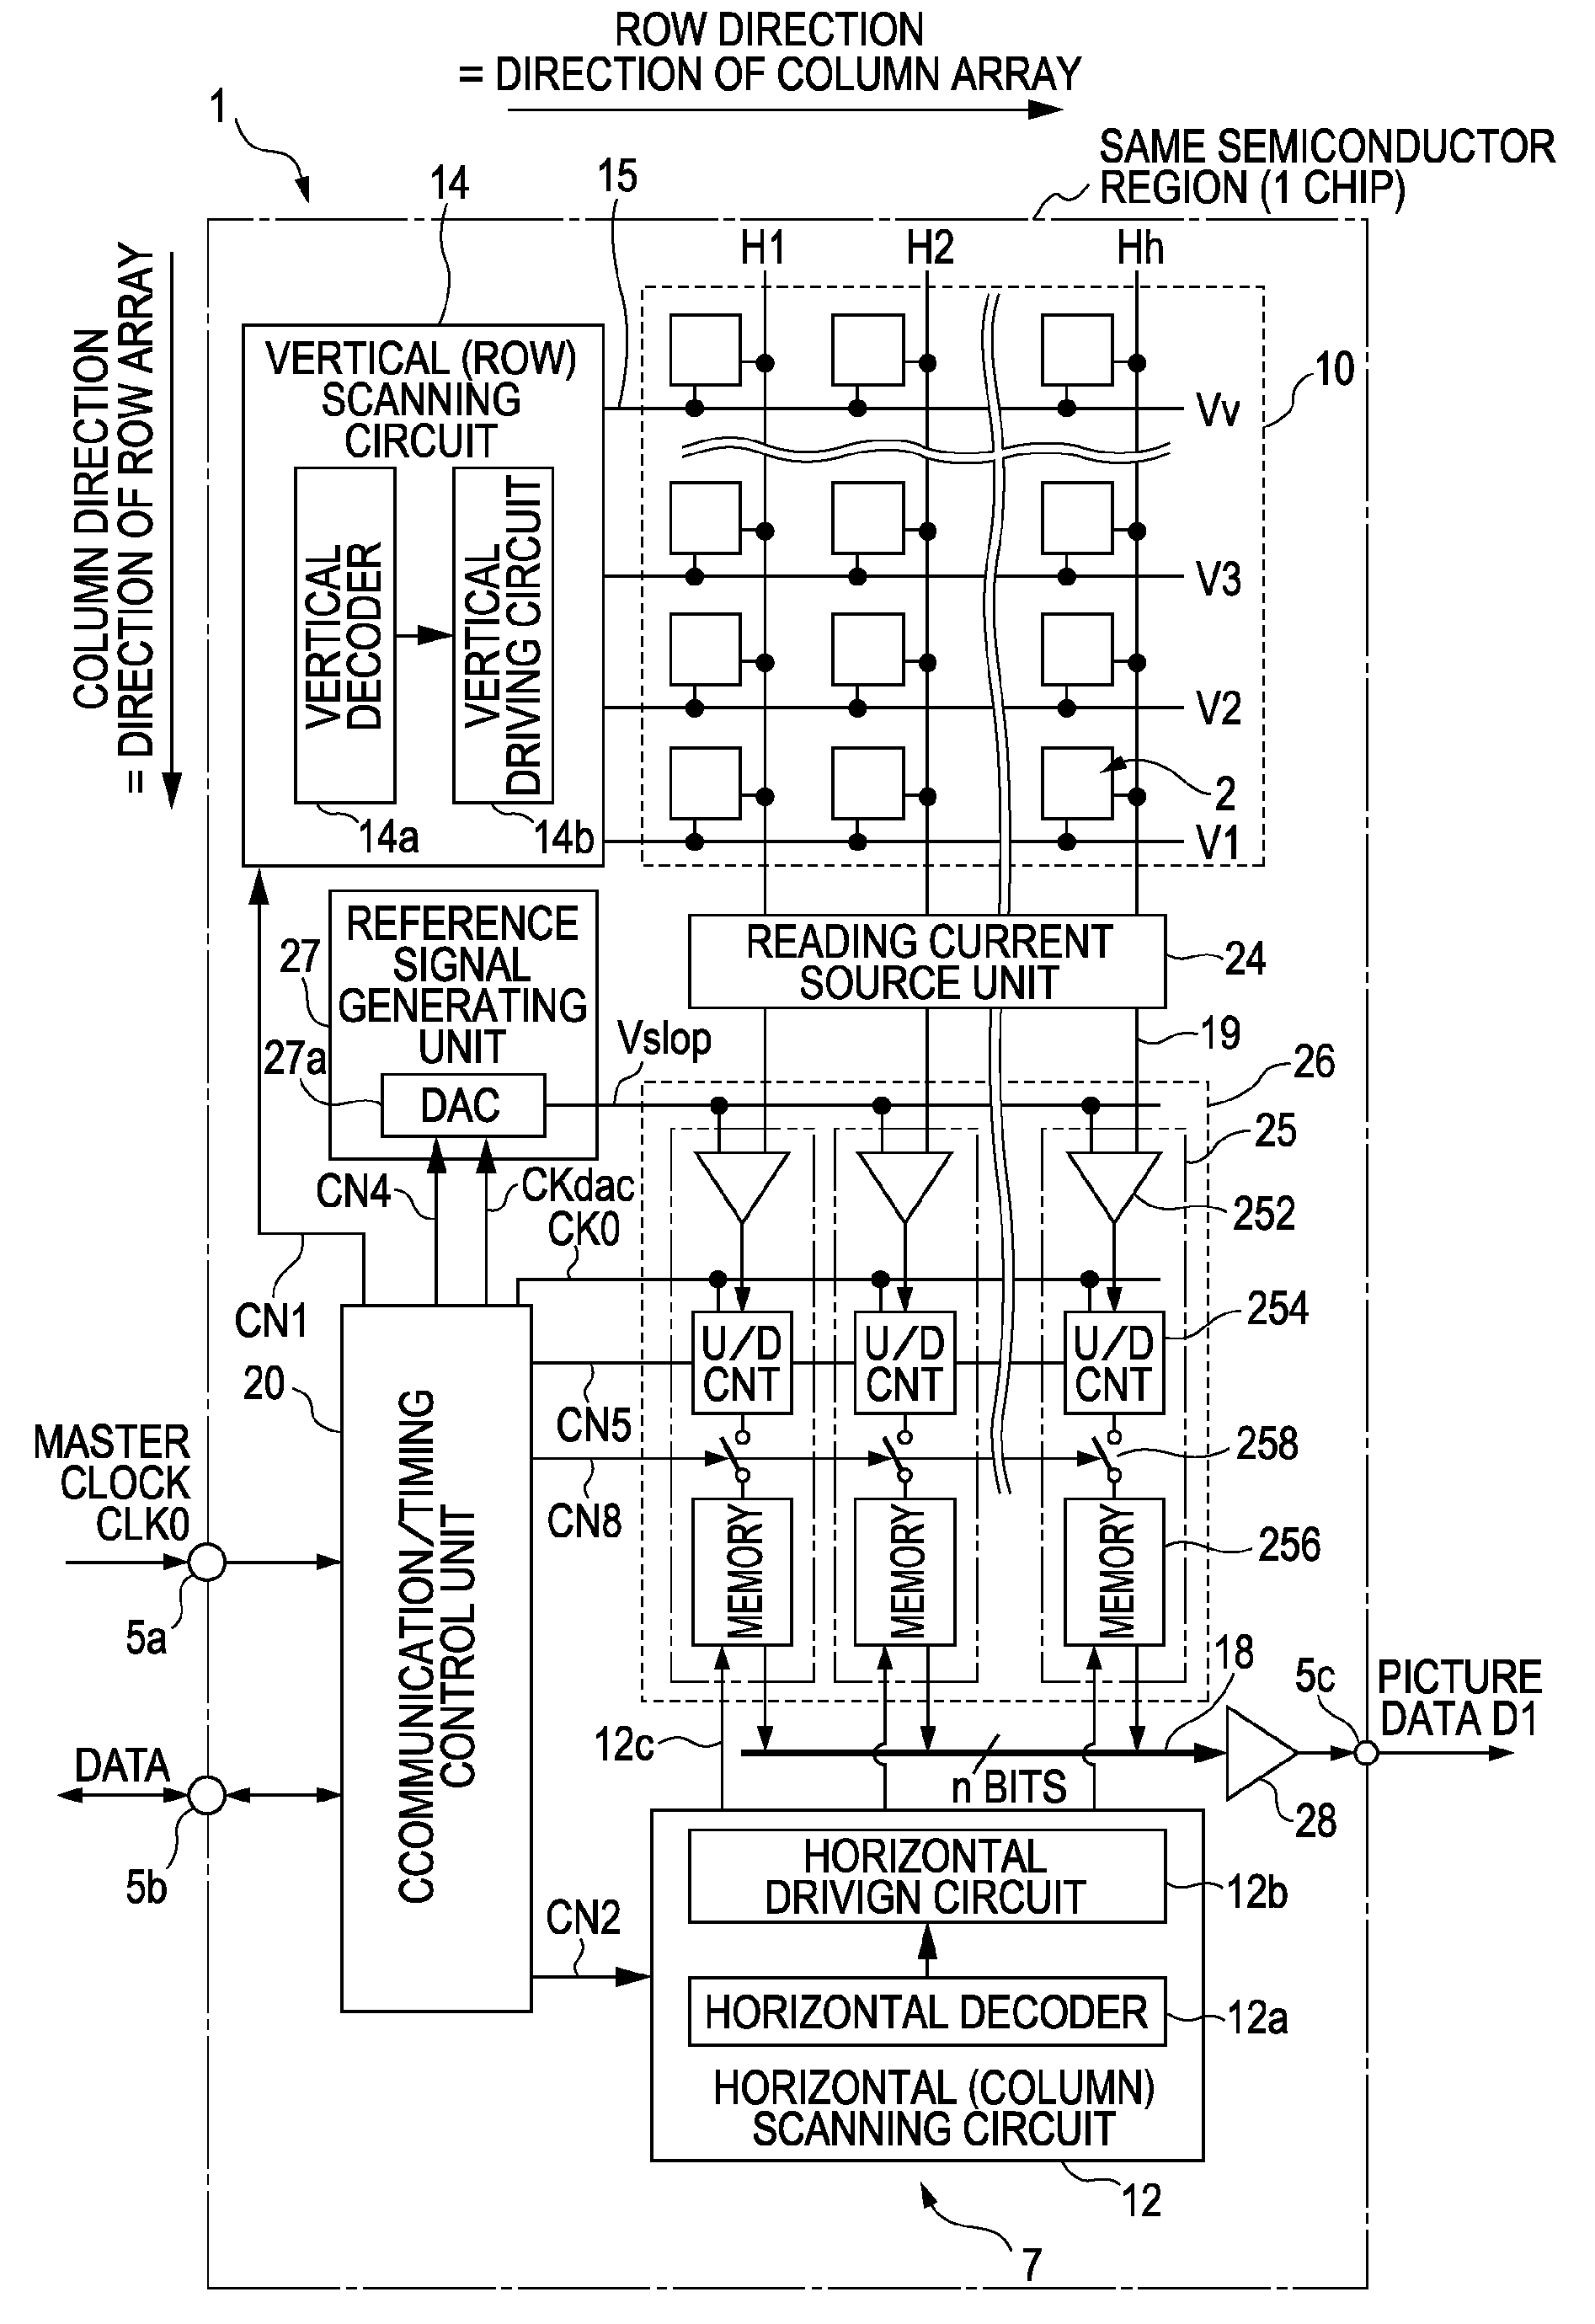 Solid-state imaging device and imaging device